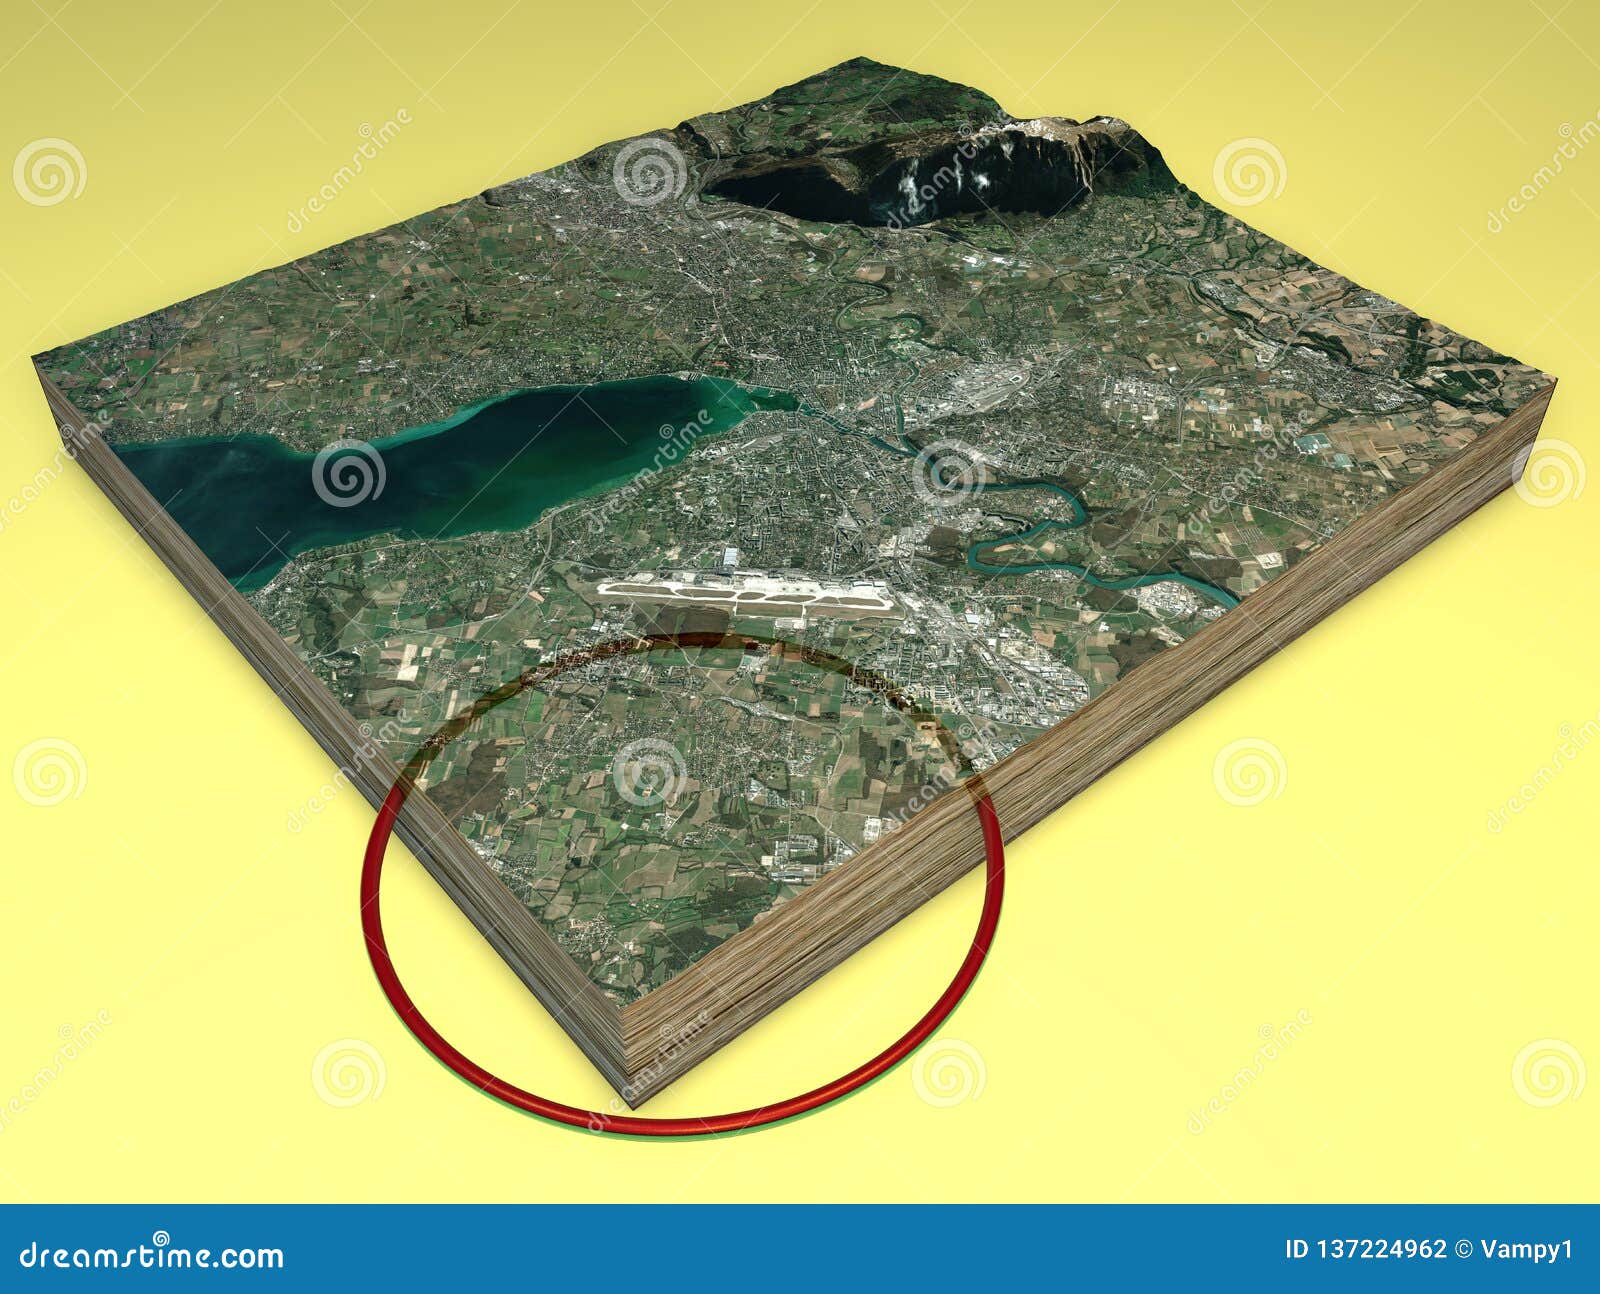 satellite view and 3d section of the terrain, map of geneva and cern. tunnel and map of the nuclear research facility